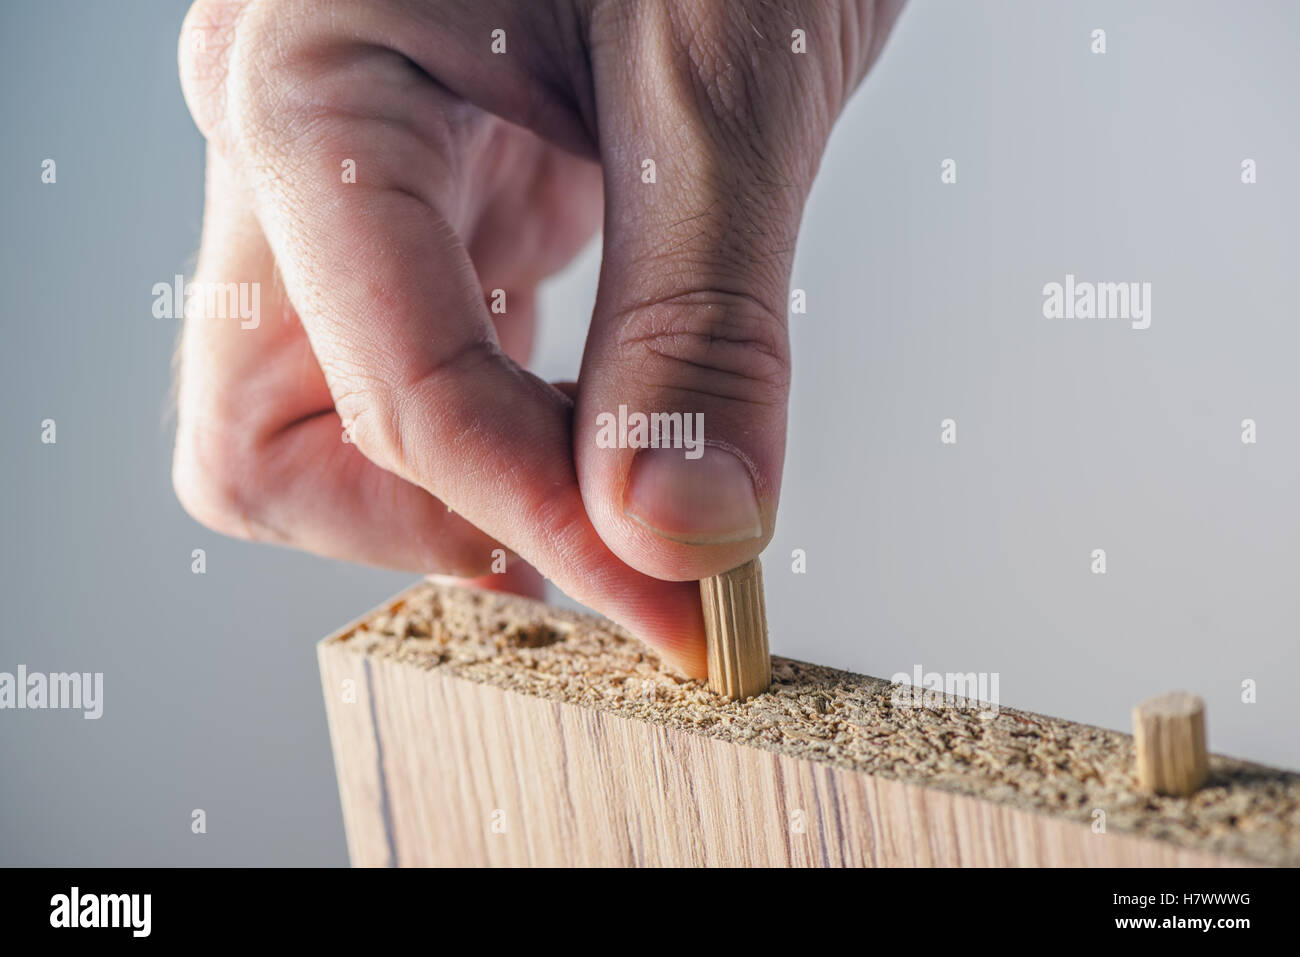 Man assembling furniture at home, male hand with wooden dowel pins and plywood board Stock Photo